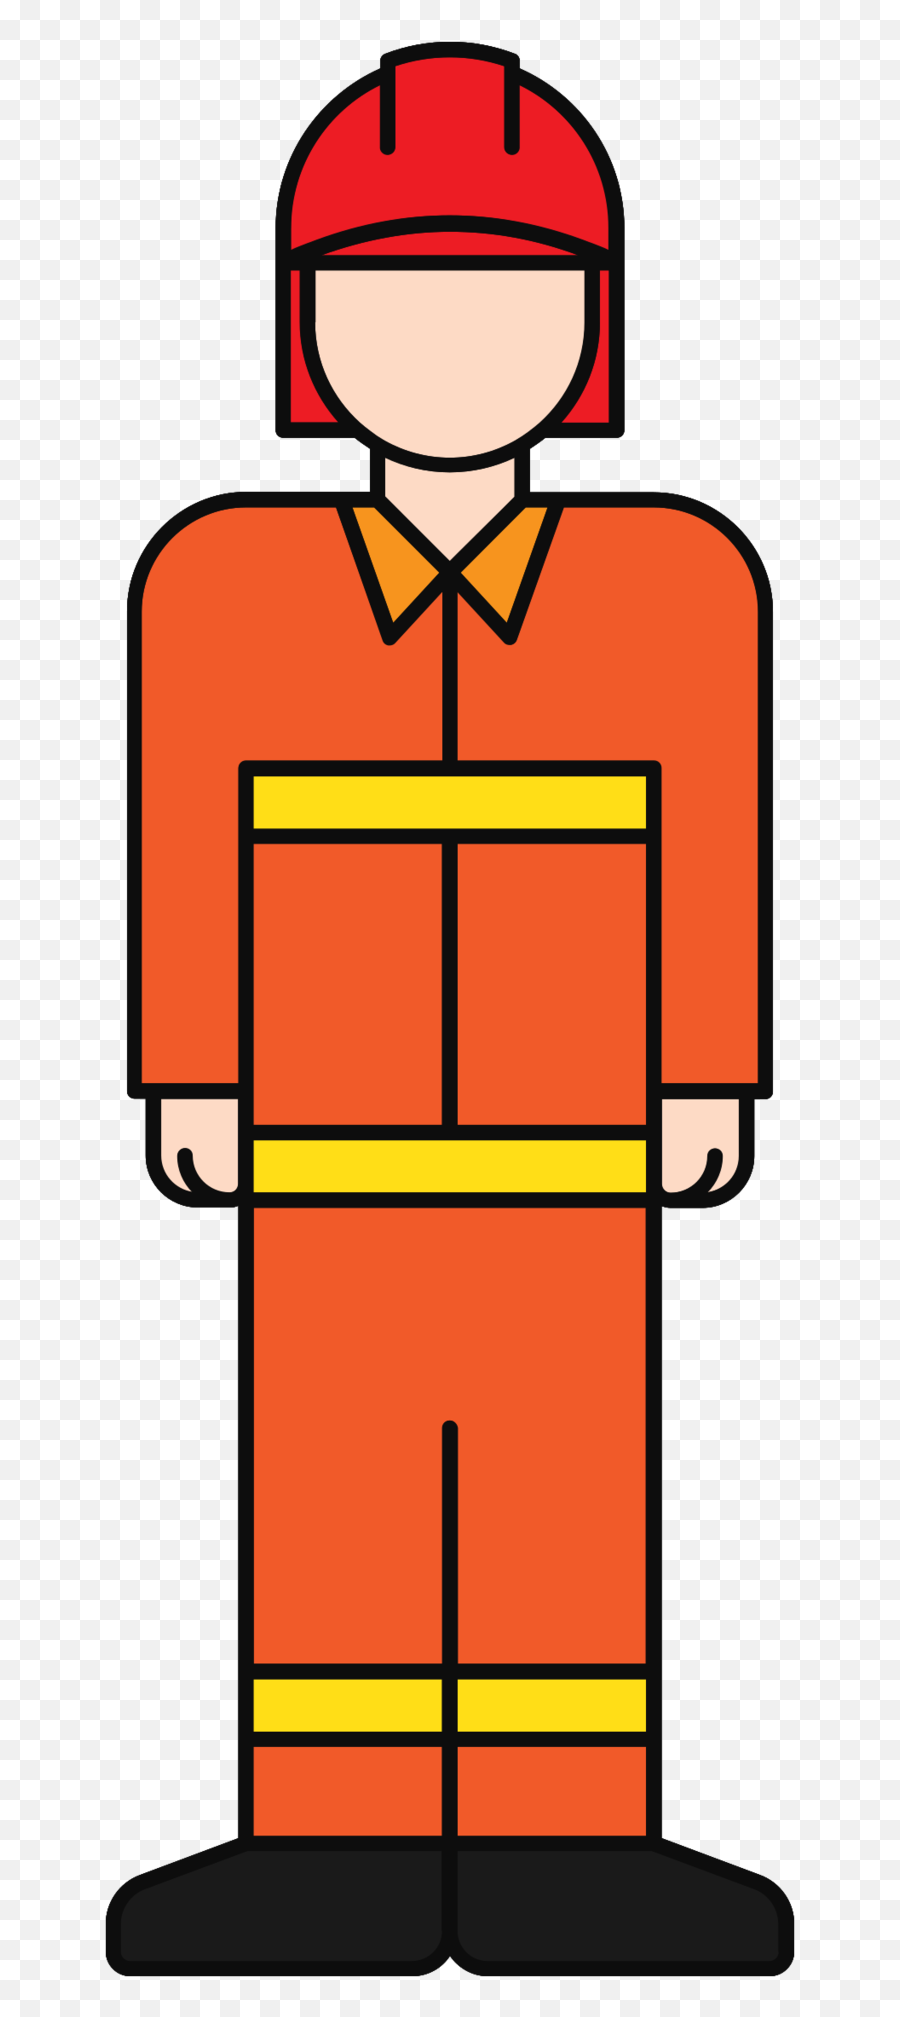 Free Firefighter 1206096 Png With Transparent Background - Security Guard Png With Transparent Background,Fire Fighter Icon